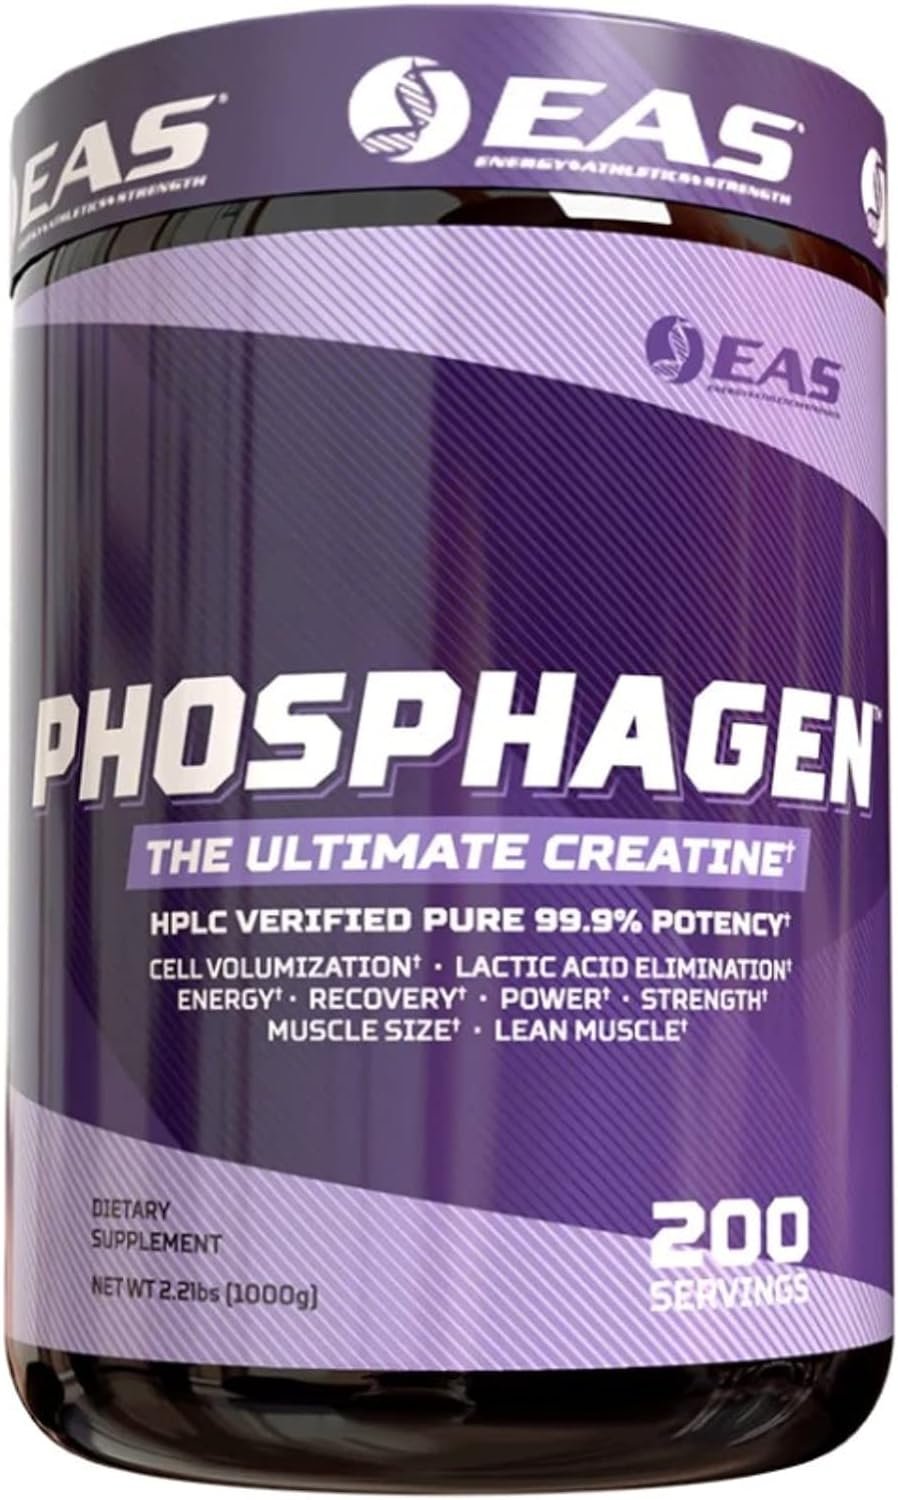 EAS Phosphagen Ultimate Creatine Powder | Power, Strength, Muscle Size, & Cell Volumization | Pure 99.9% Potency | 200 Servings (Unflavored)